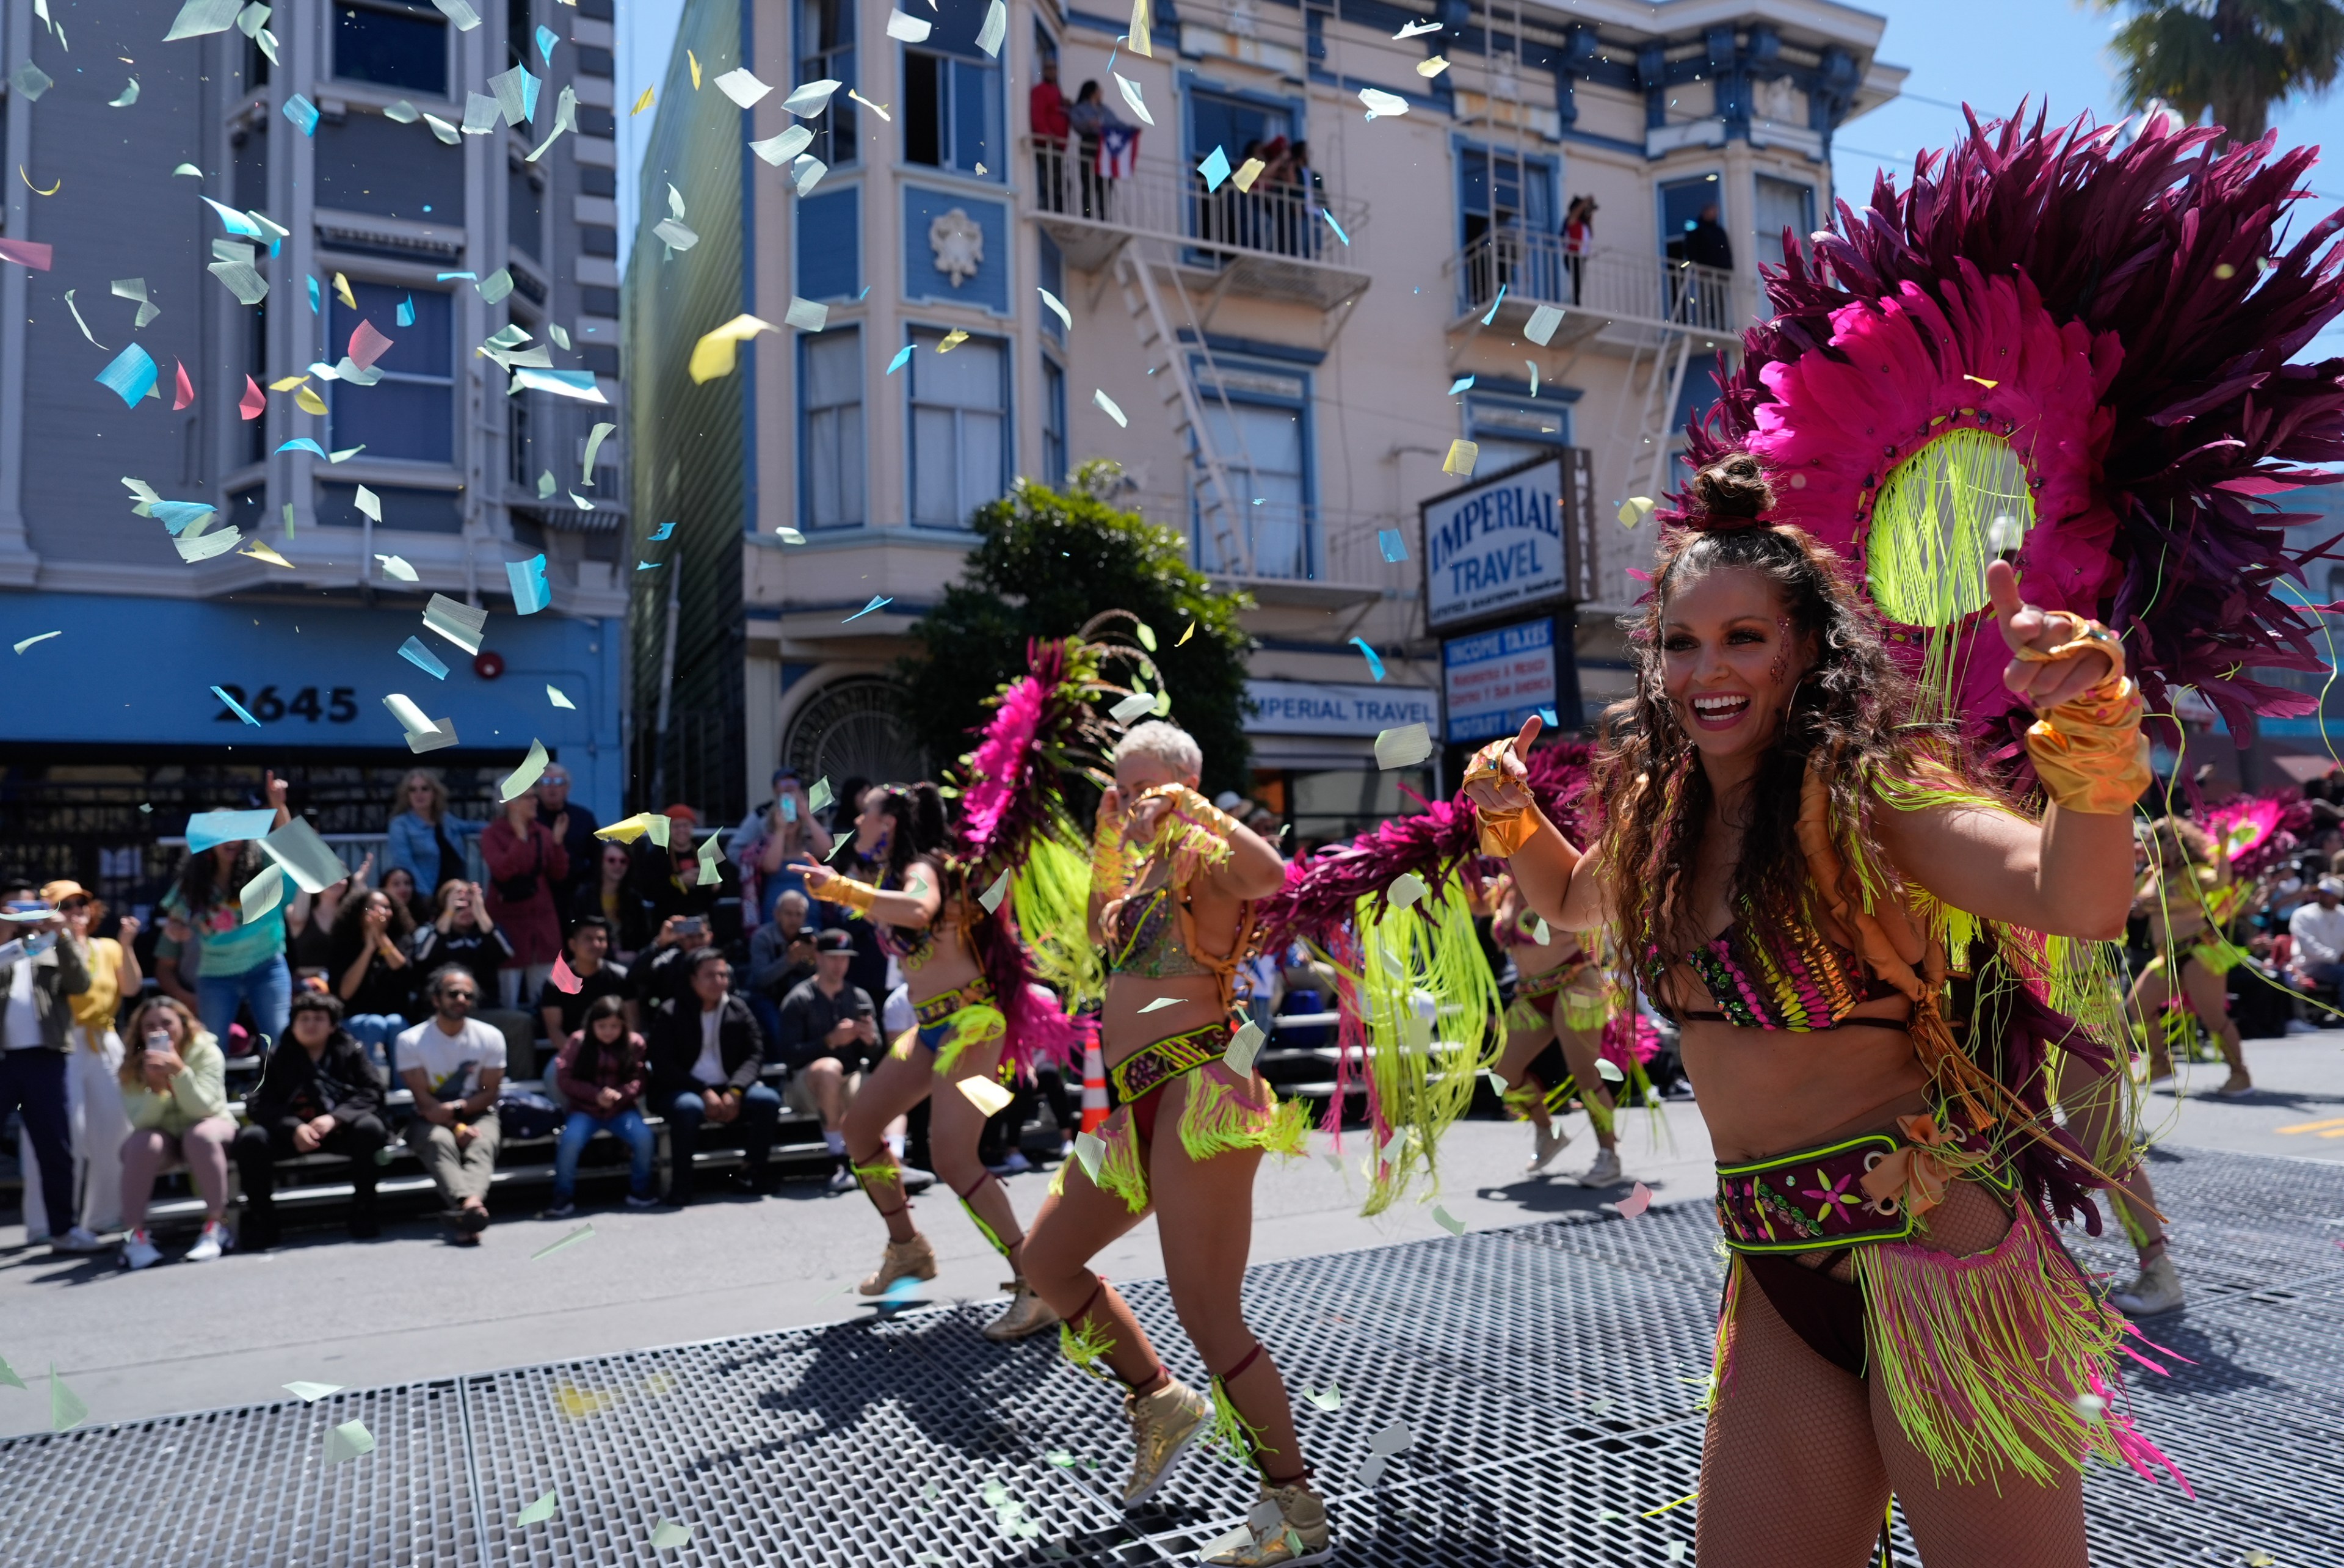 A vibrant street parade with dancers in colorful feathered costumes moves down the street, surrounded by confetti and cheering spectators.